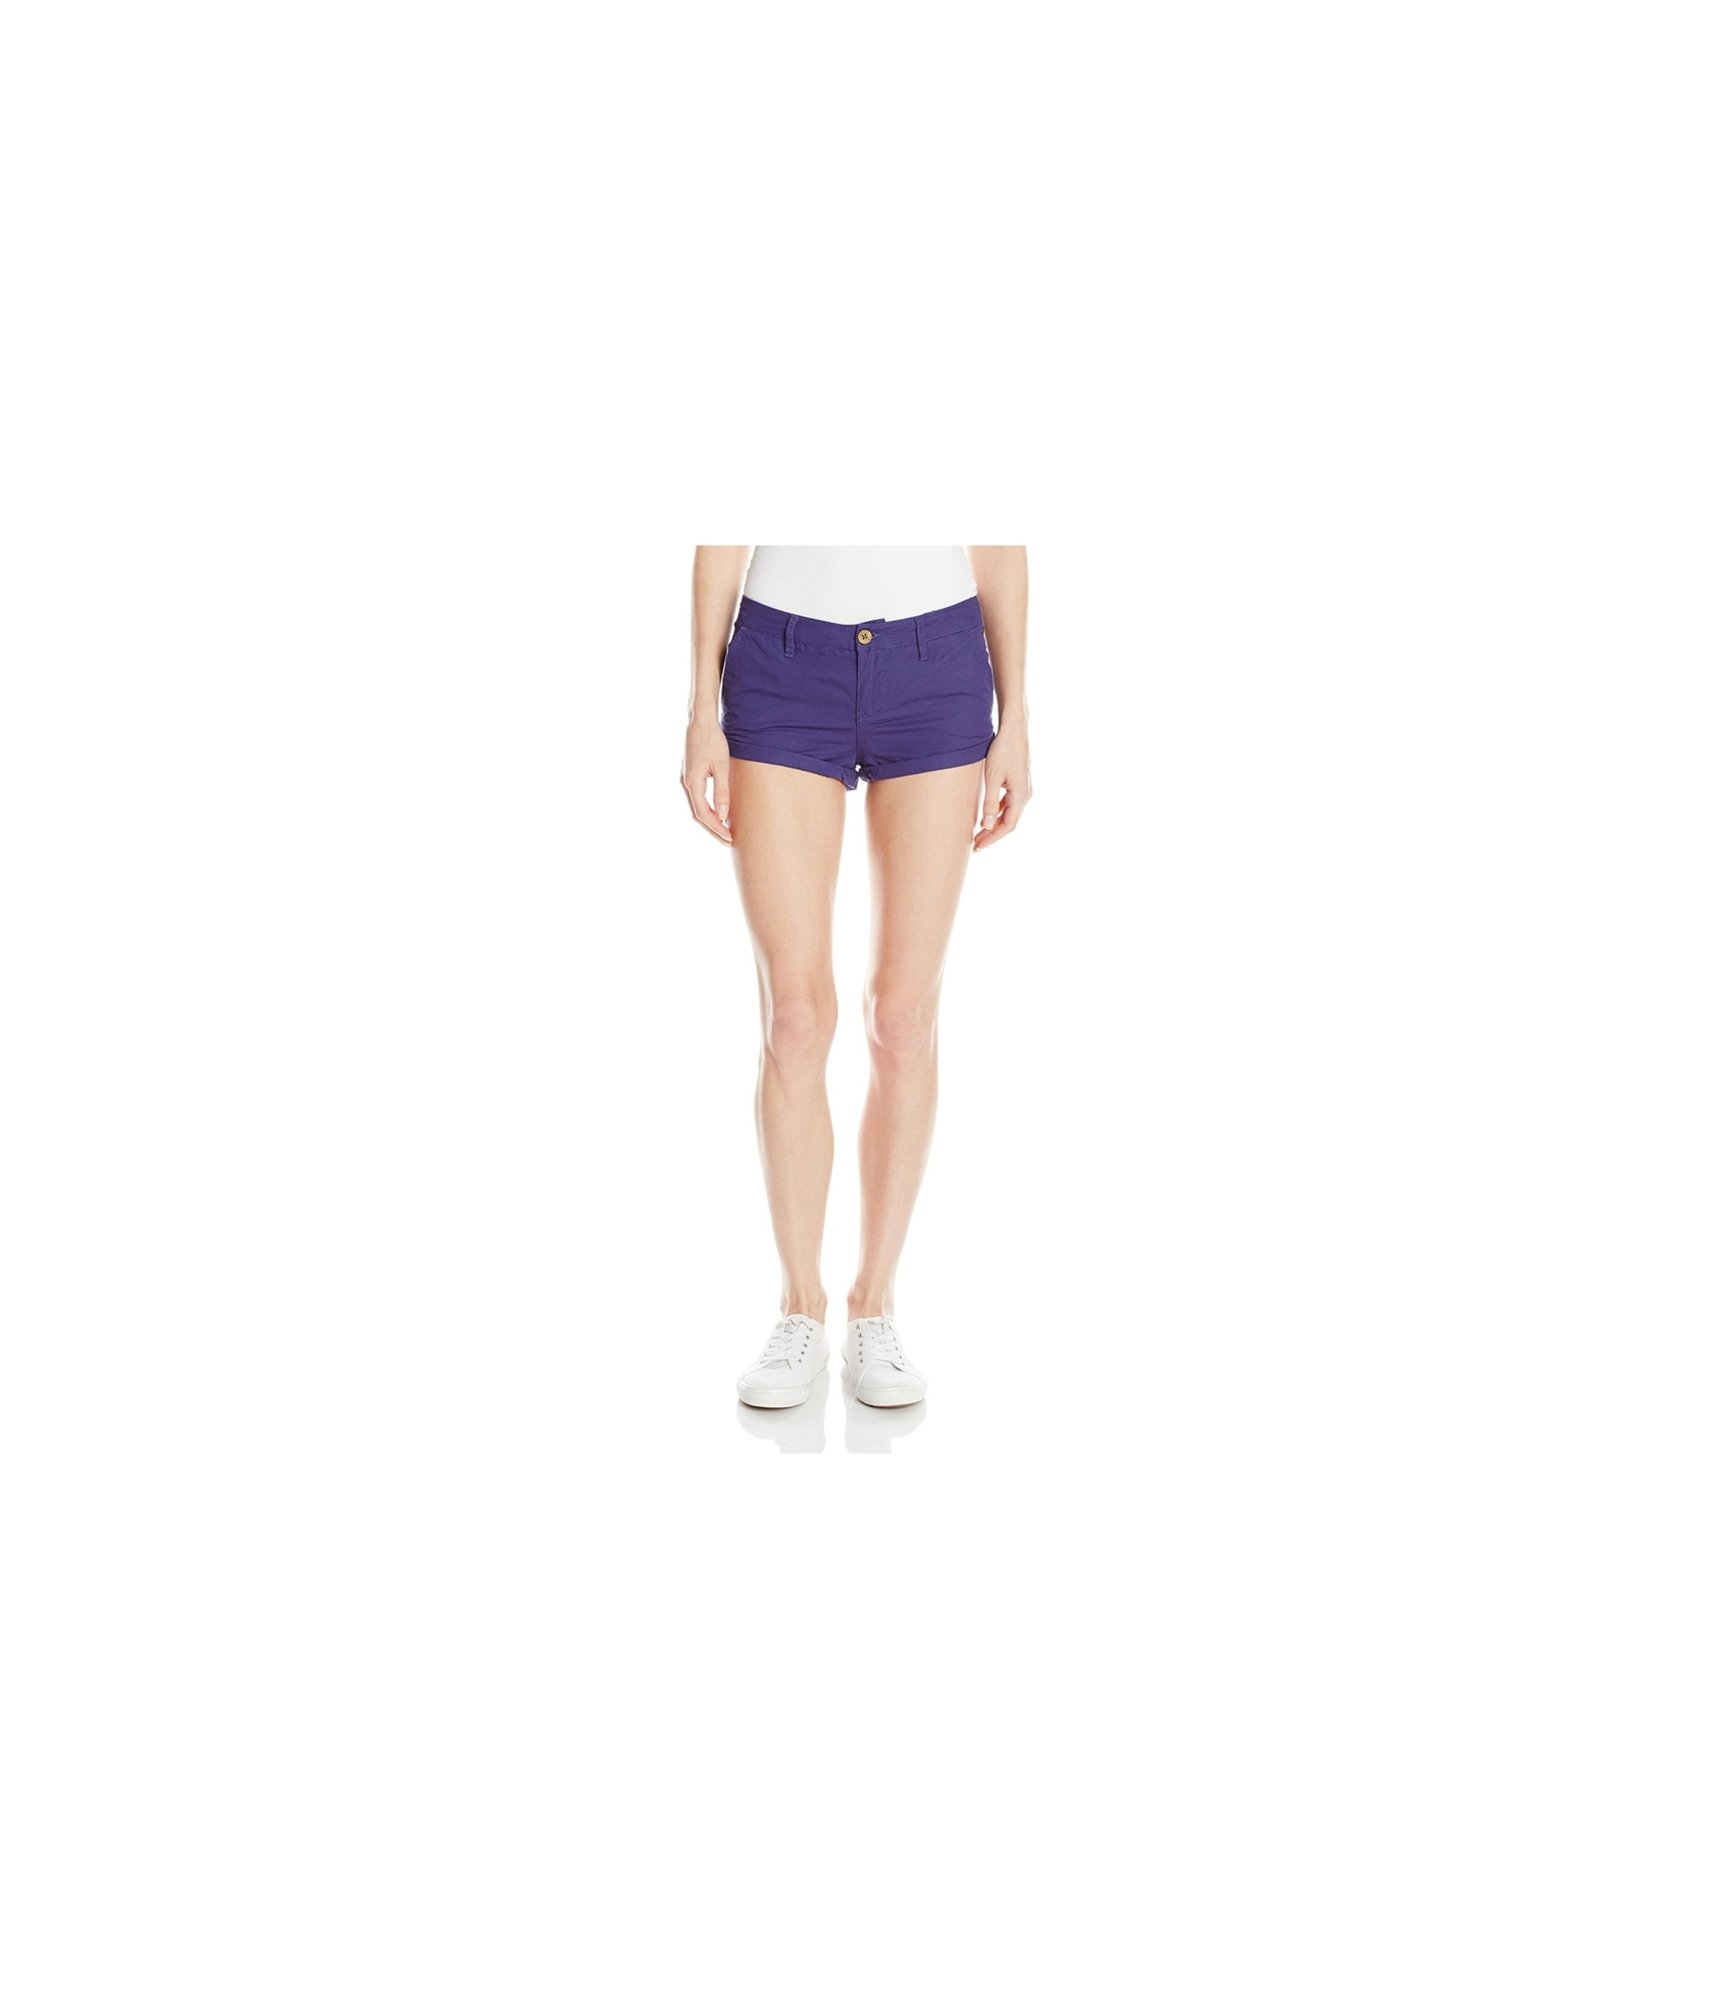 accumuleren aardolie rol Buy a Womens Roxy Cheeky Cuffed Casual Chino Shorts Online | TagsWeekly.com